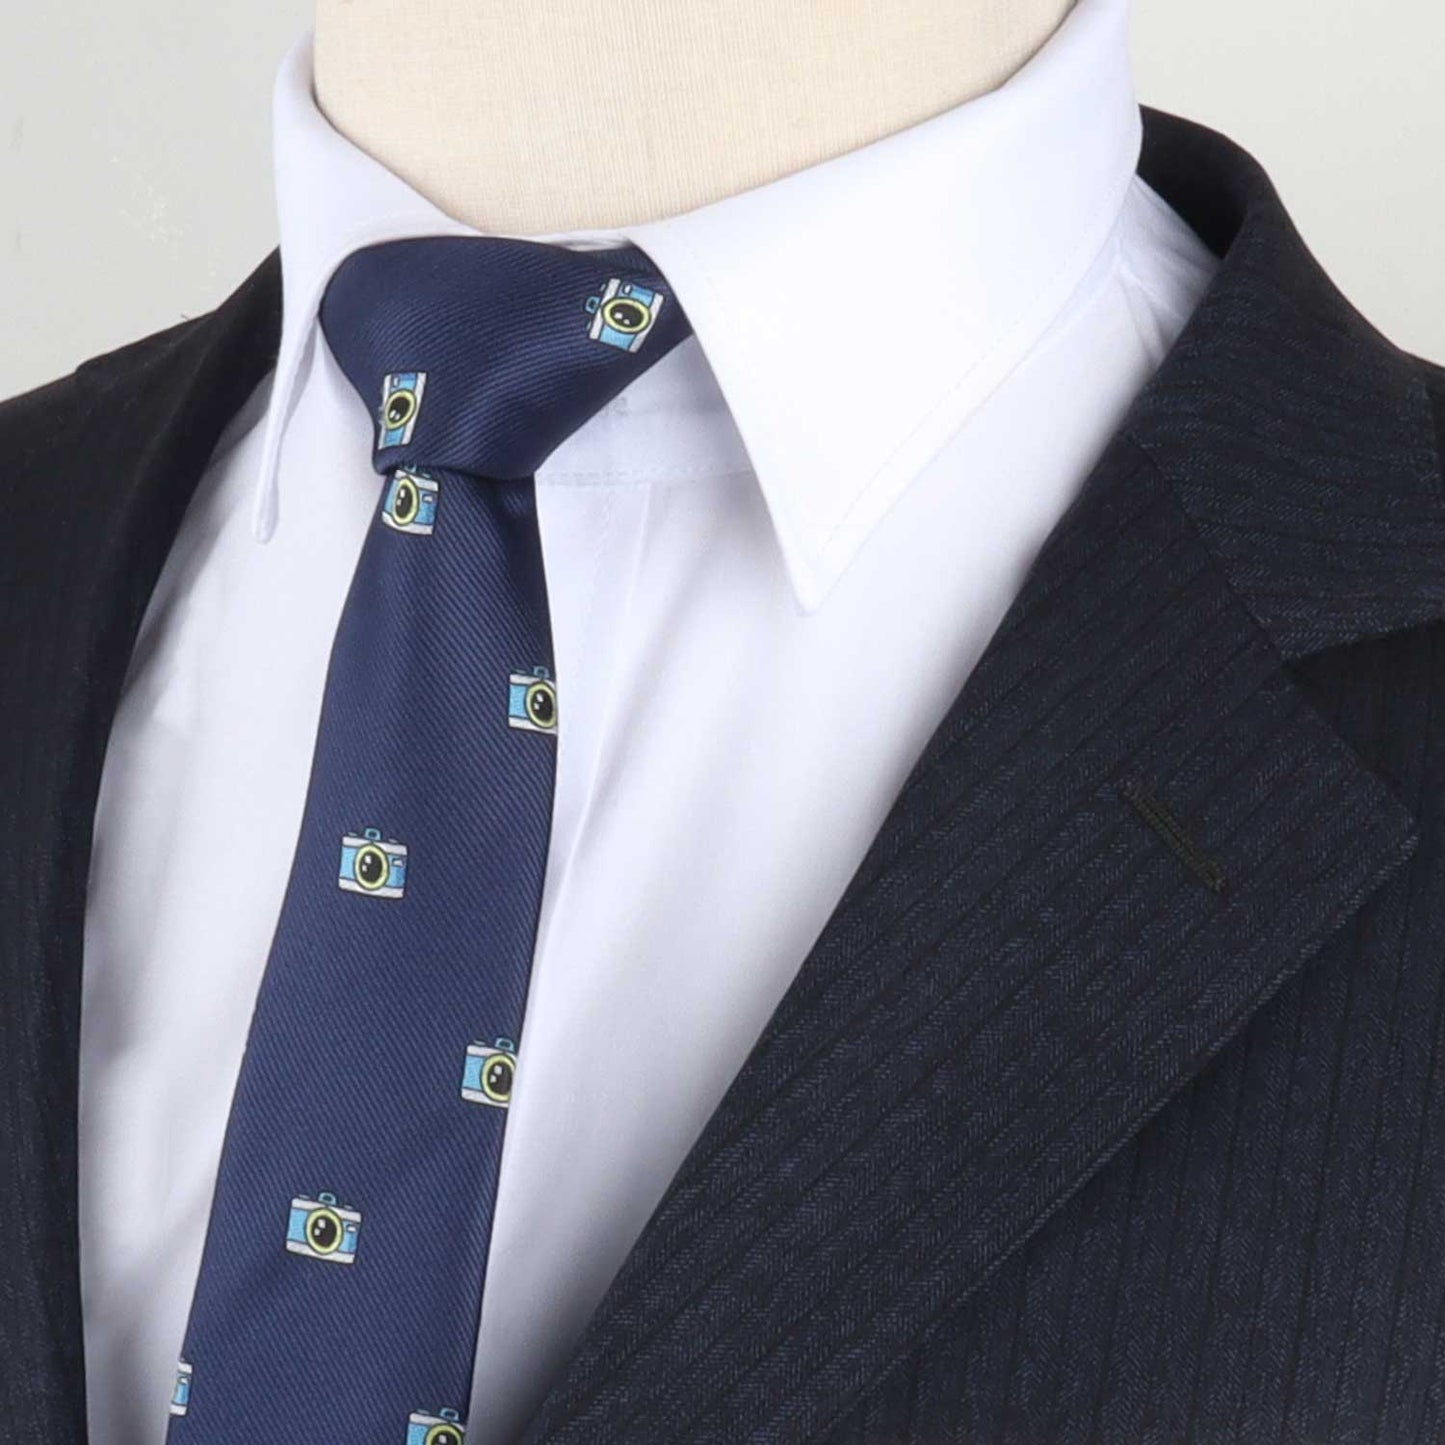 A mannequin with Camera Skinny Tie wearing a blue tie.